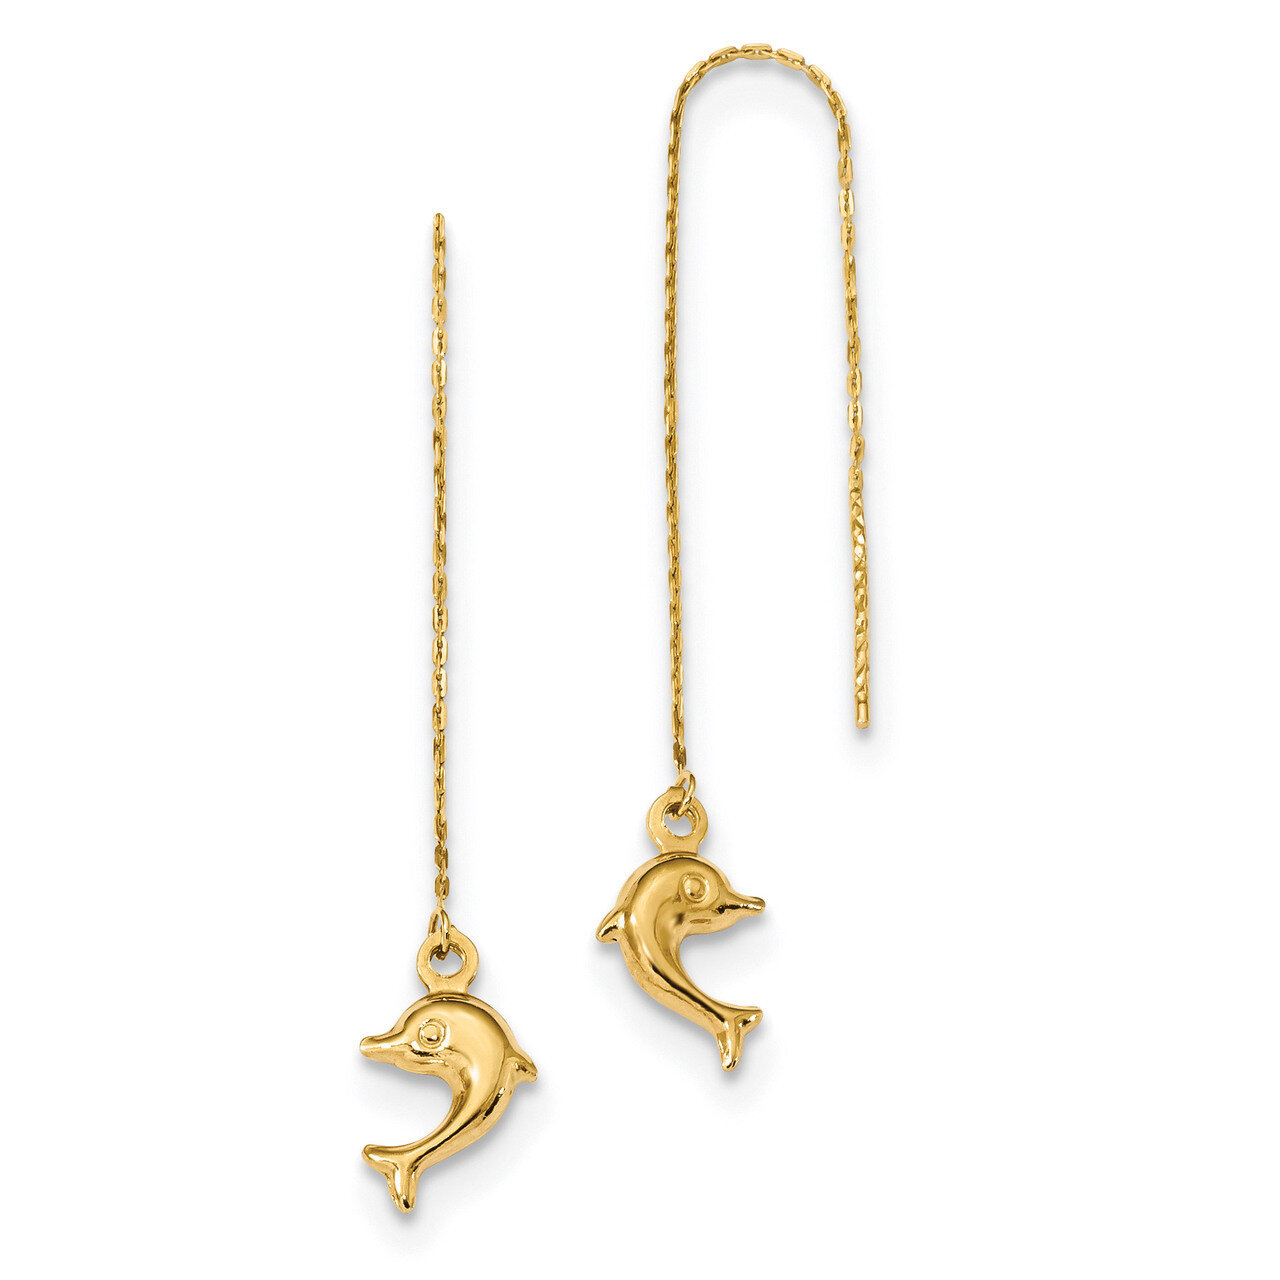 Dolphins Threader Earrings 14k Gold Polished TC997